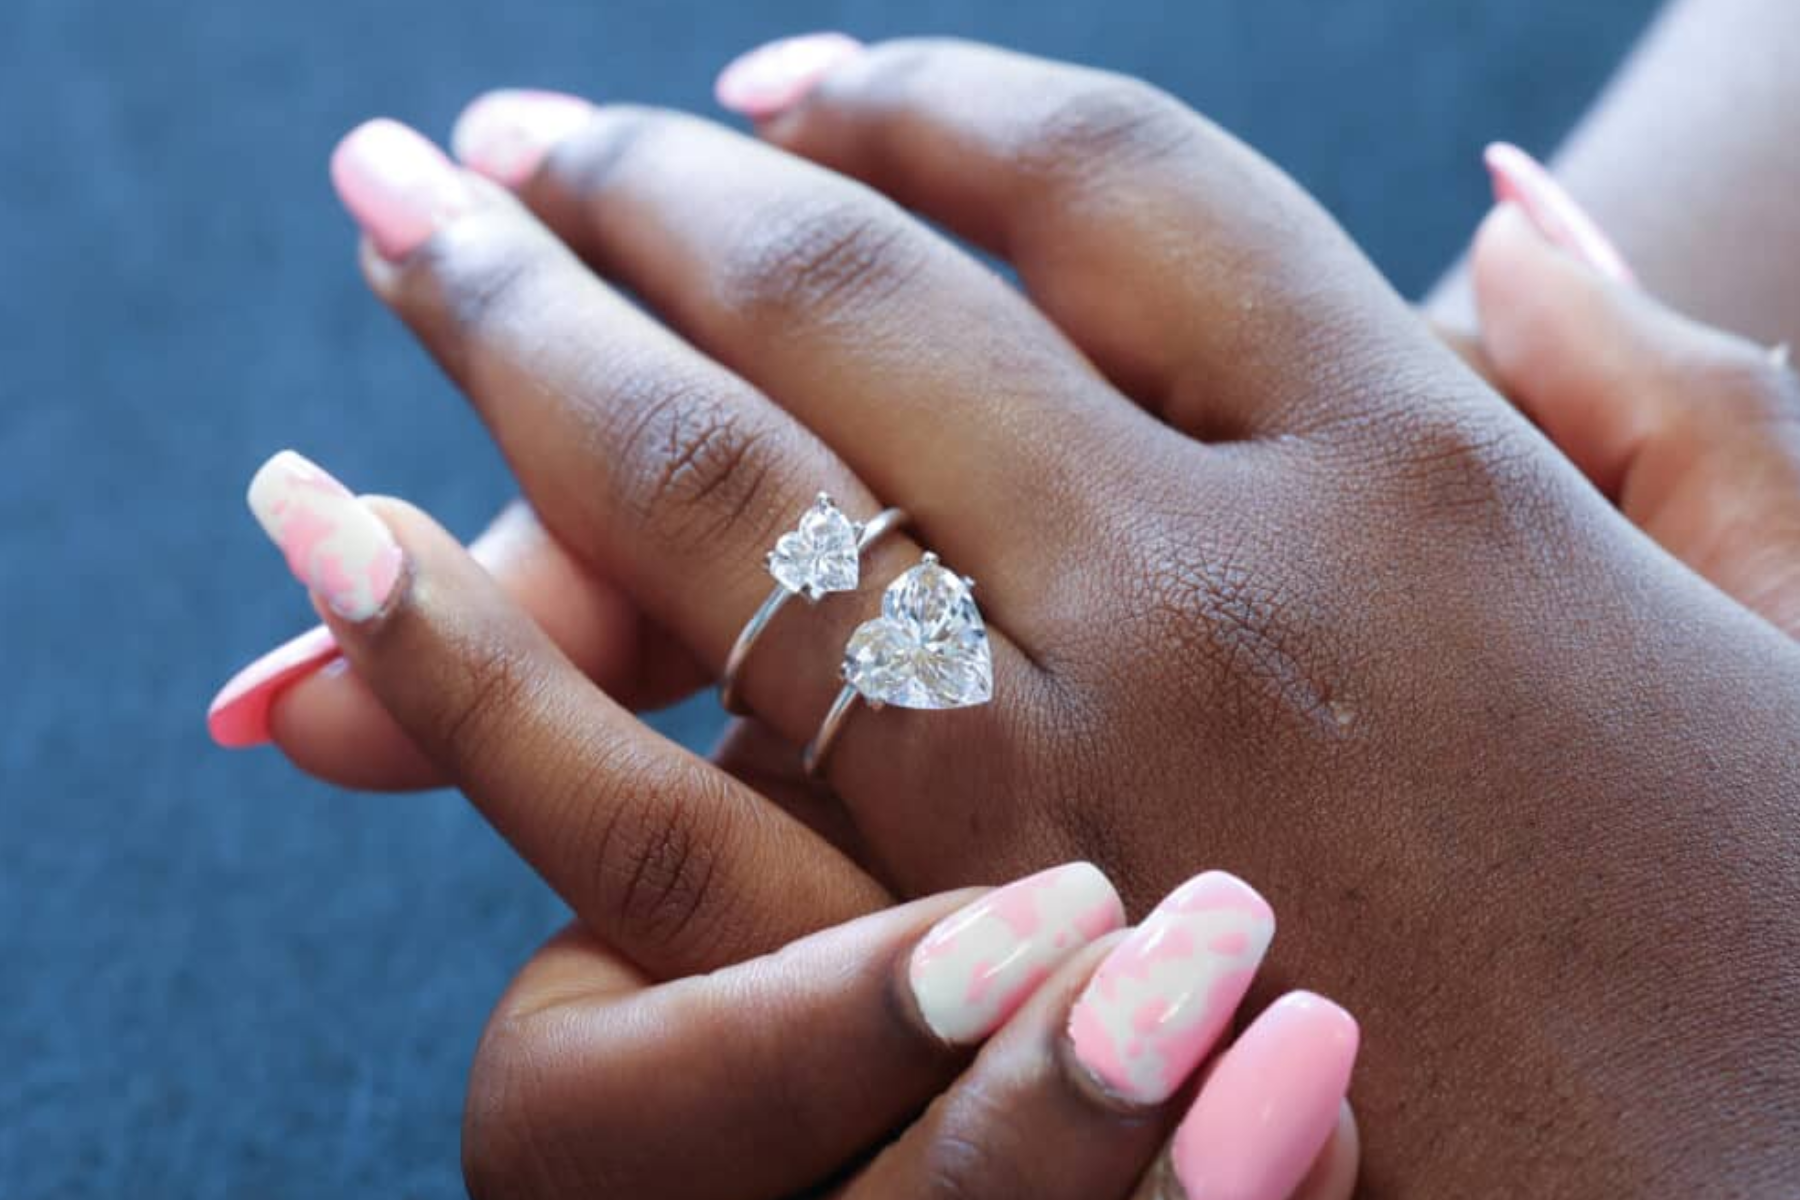 Heart-shaped Diamond Engagement Rings - A Symbol Of True Love